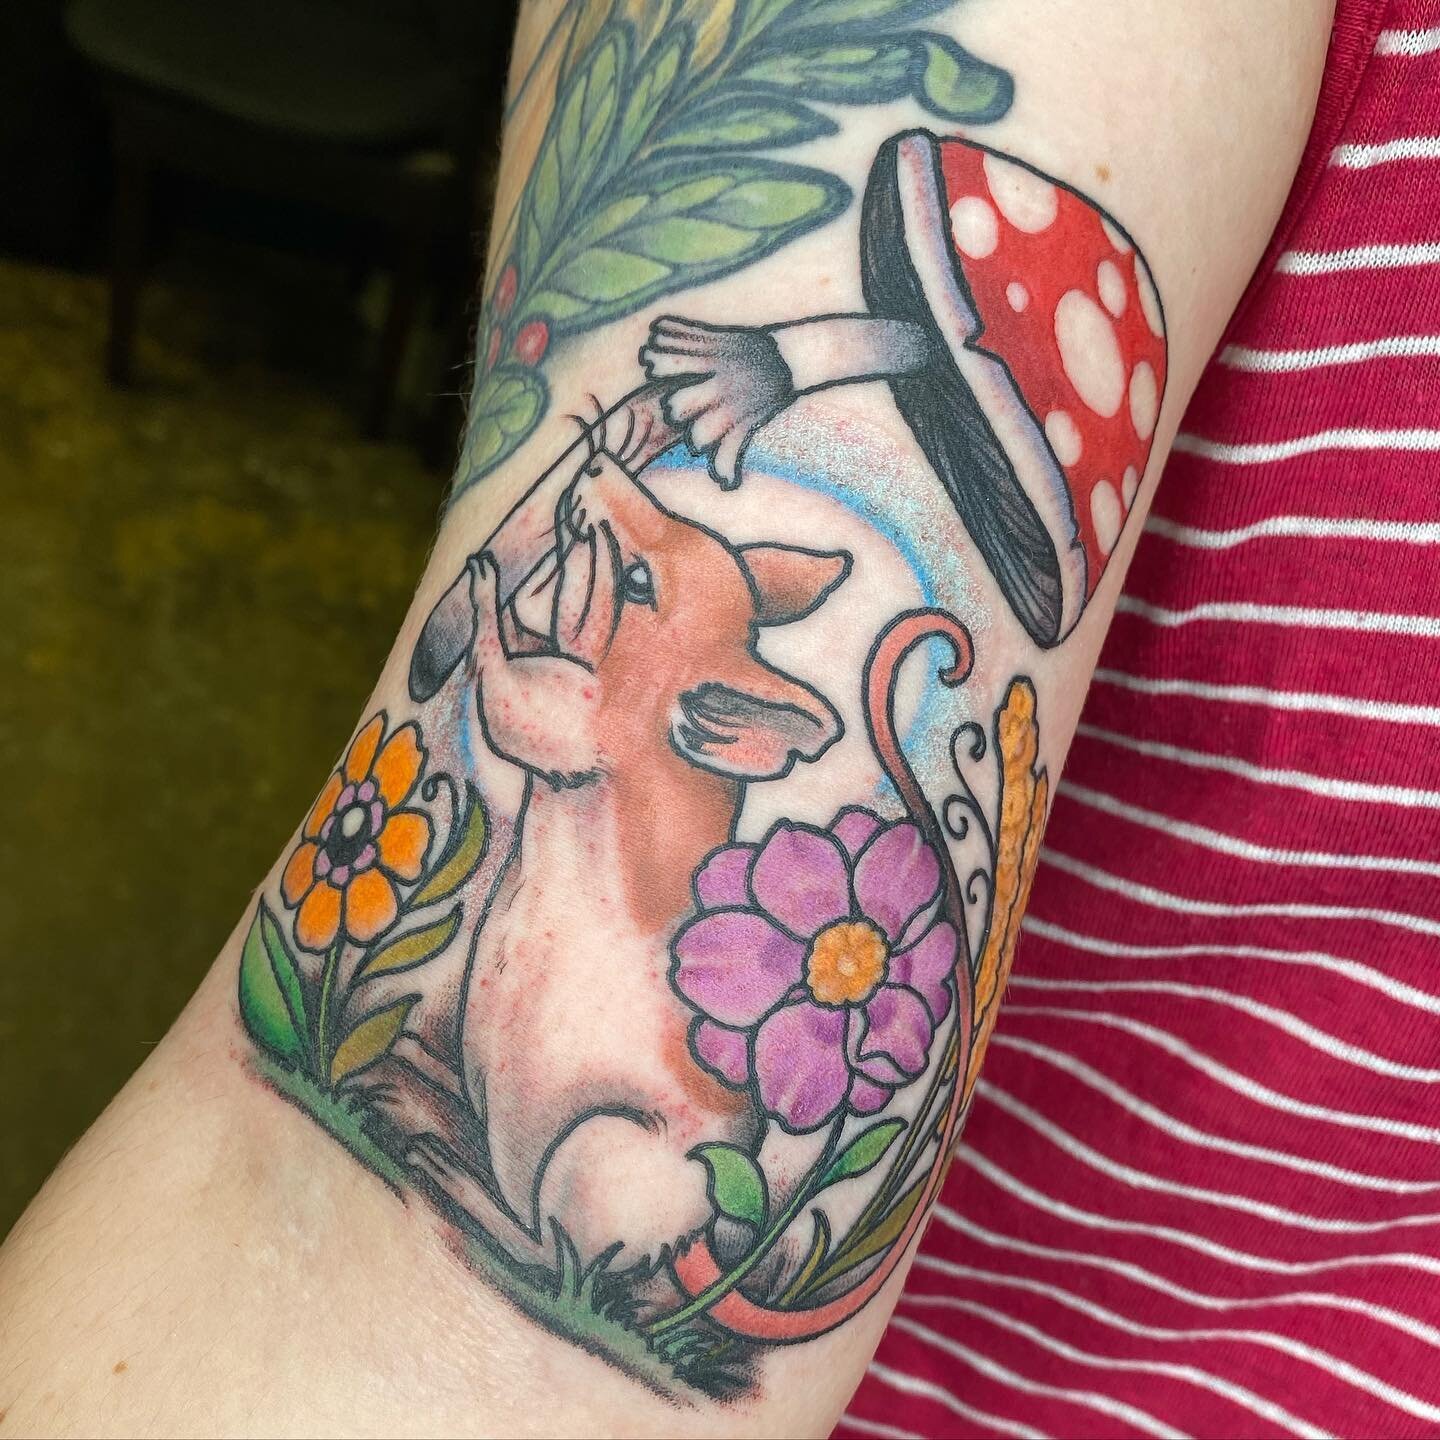 Right in the elbow ditch so hard to get a photo of the whole bb. This dude learned the secrets of NIHM and he&rsquo;s off to teach his friends. Thanks Lindsey!!! (Also snagged a photo of the 9 to 5 tattoo we did a while back, with some tiny touch ups